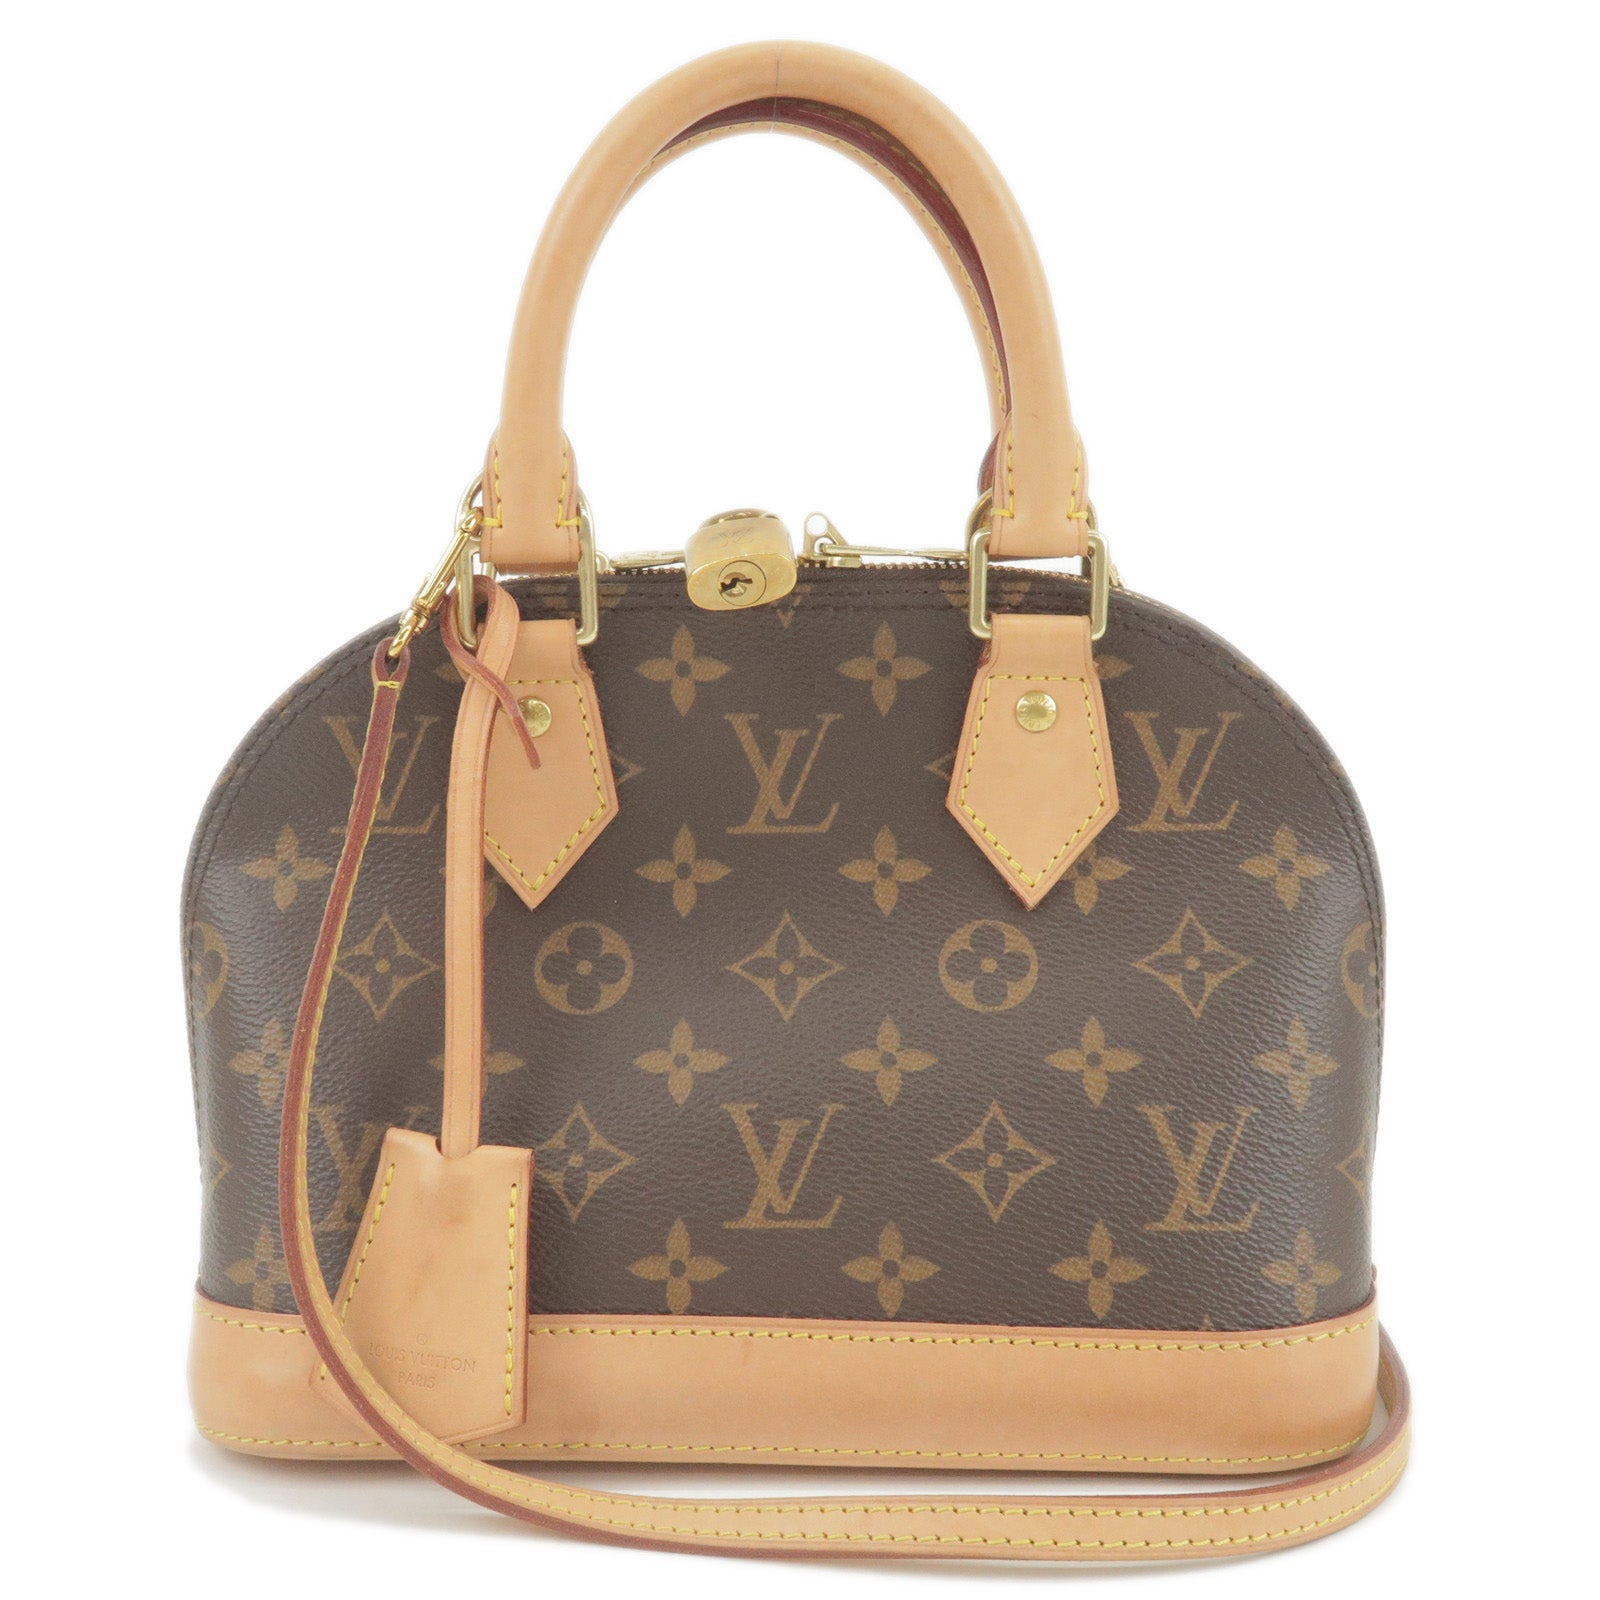 Louis Vuitton Westminster Pm Review